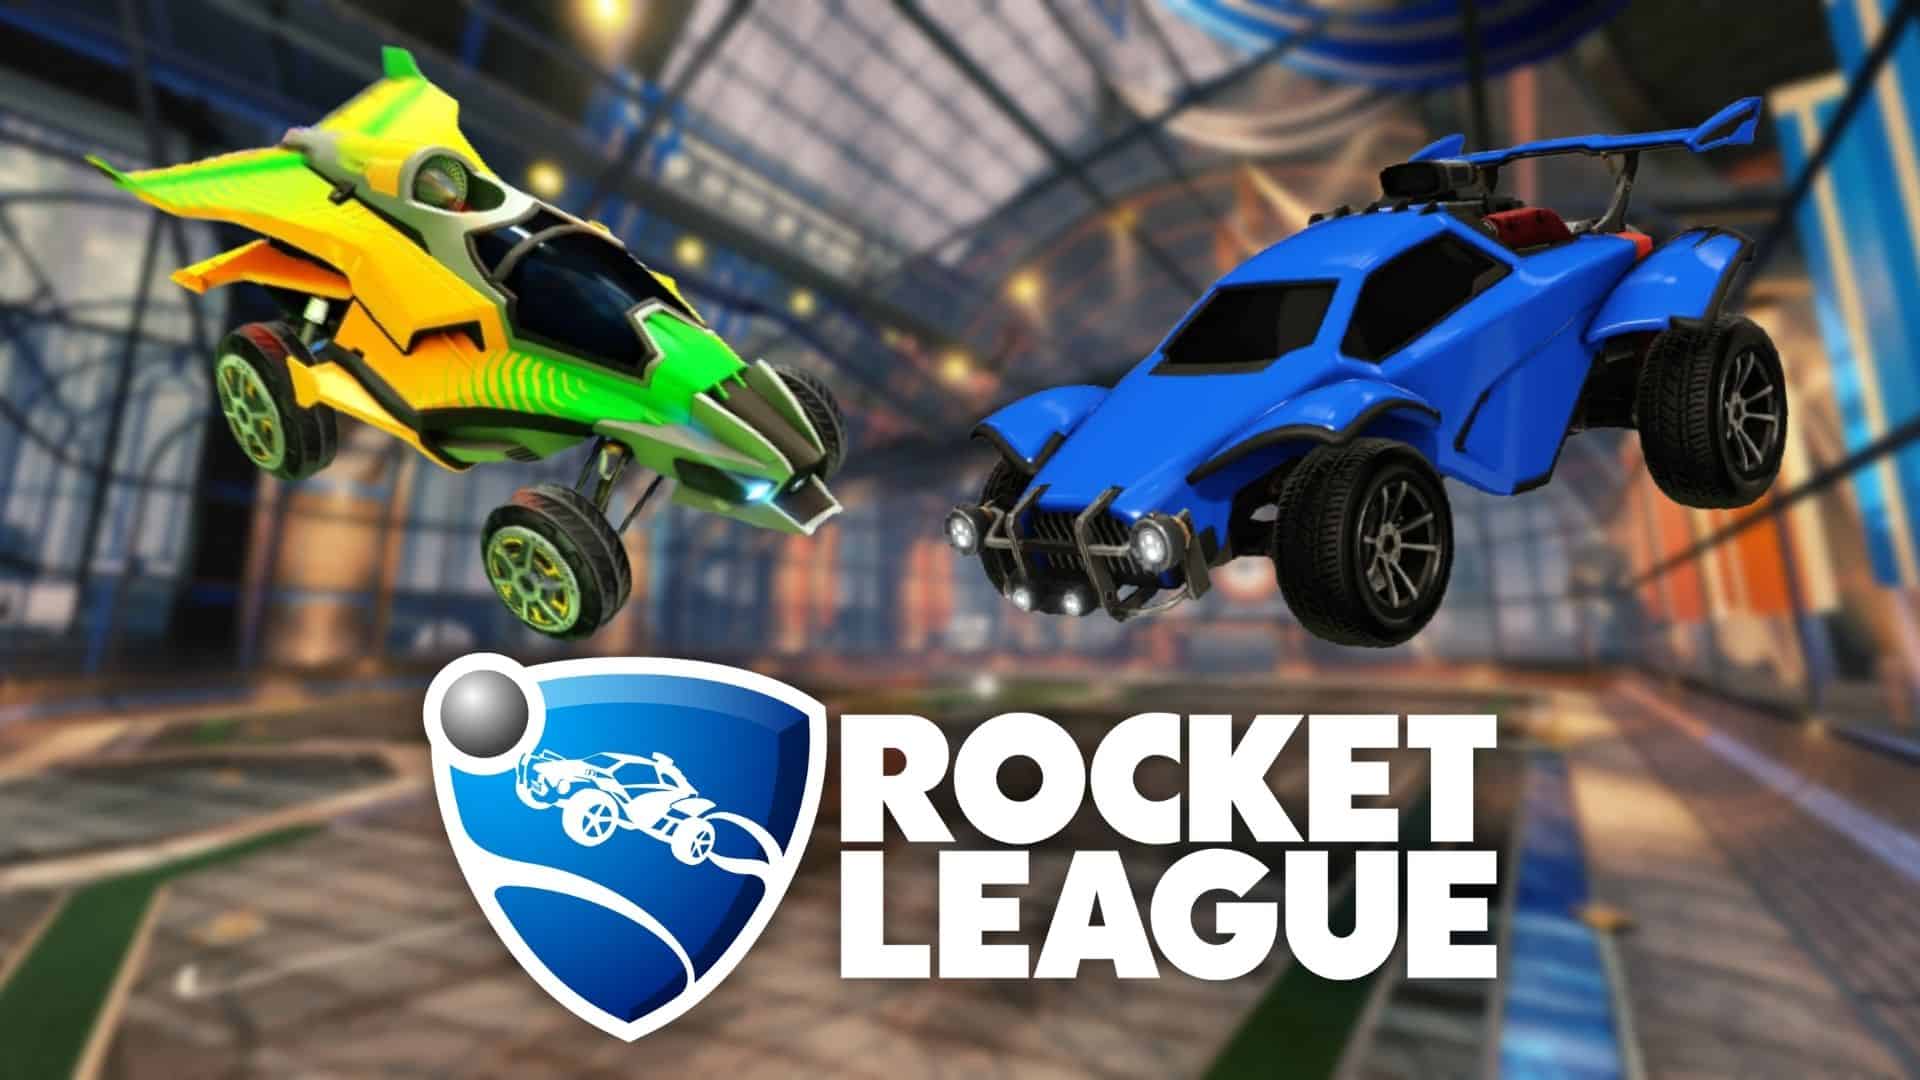 octane and aftershock in rocket league